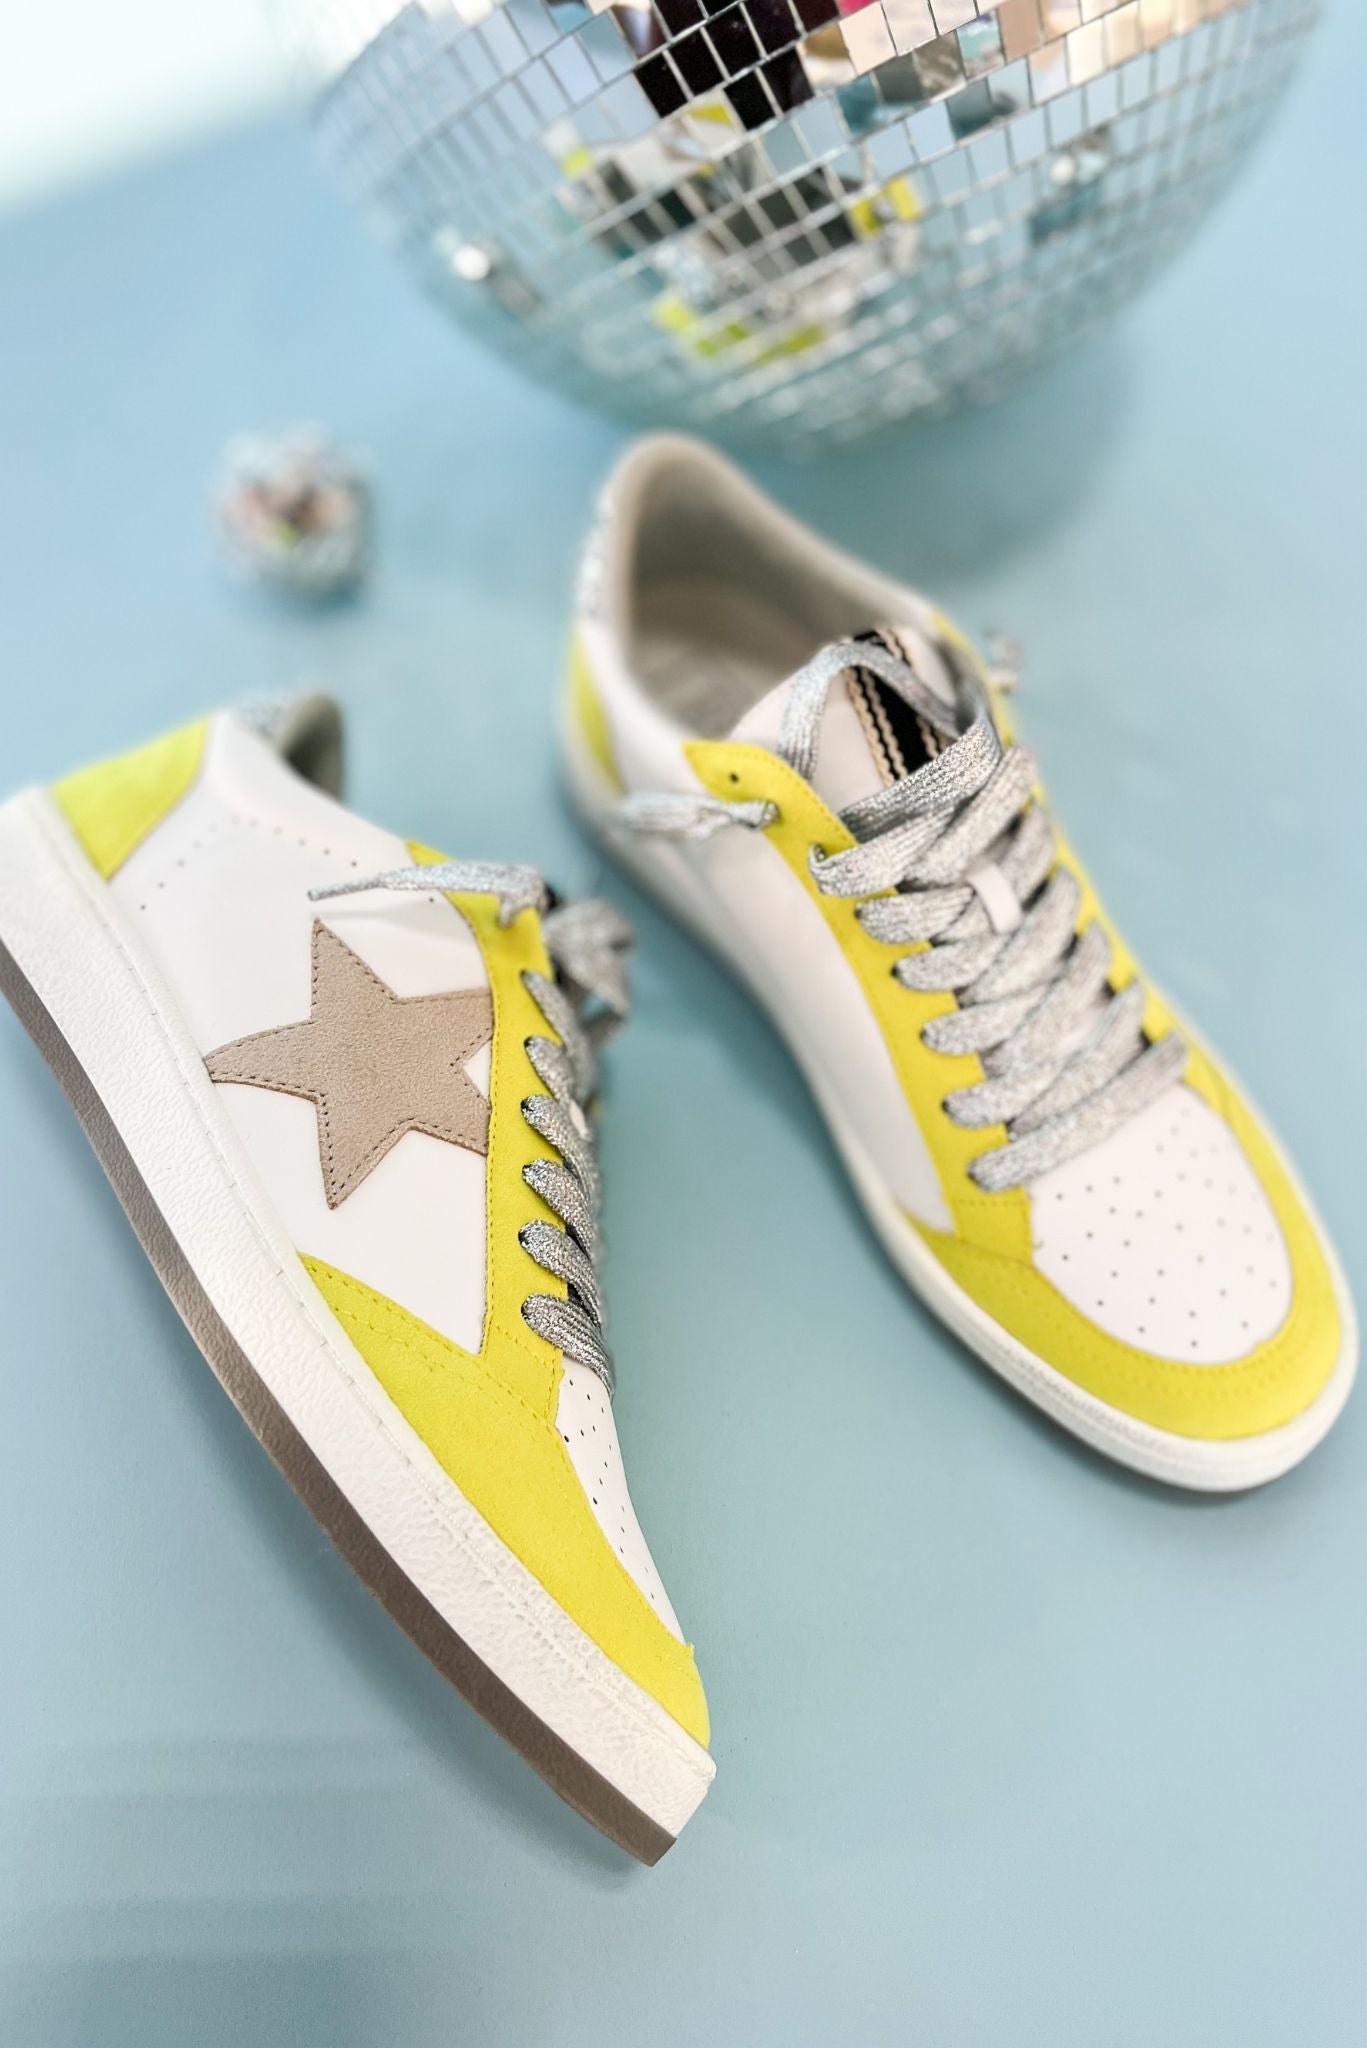 Load image into Gallery viewer, Shu Shop Neon Yellow Silver Glitter Tab Star Sneakers
